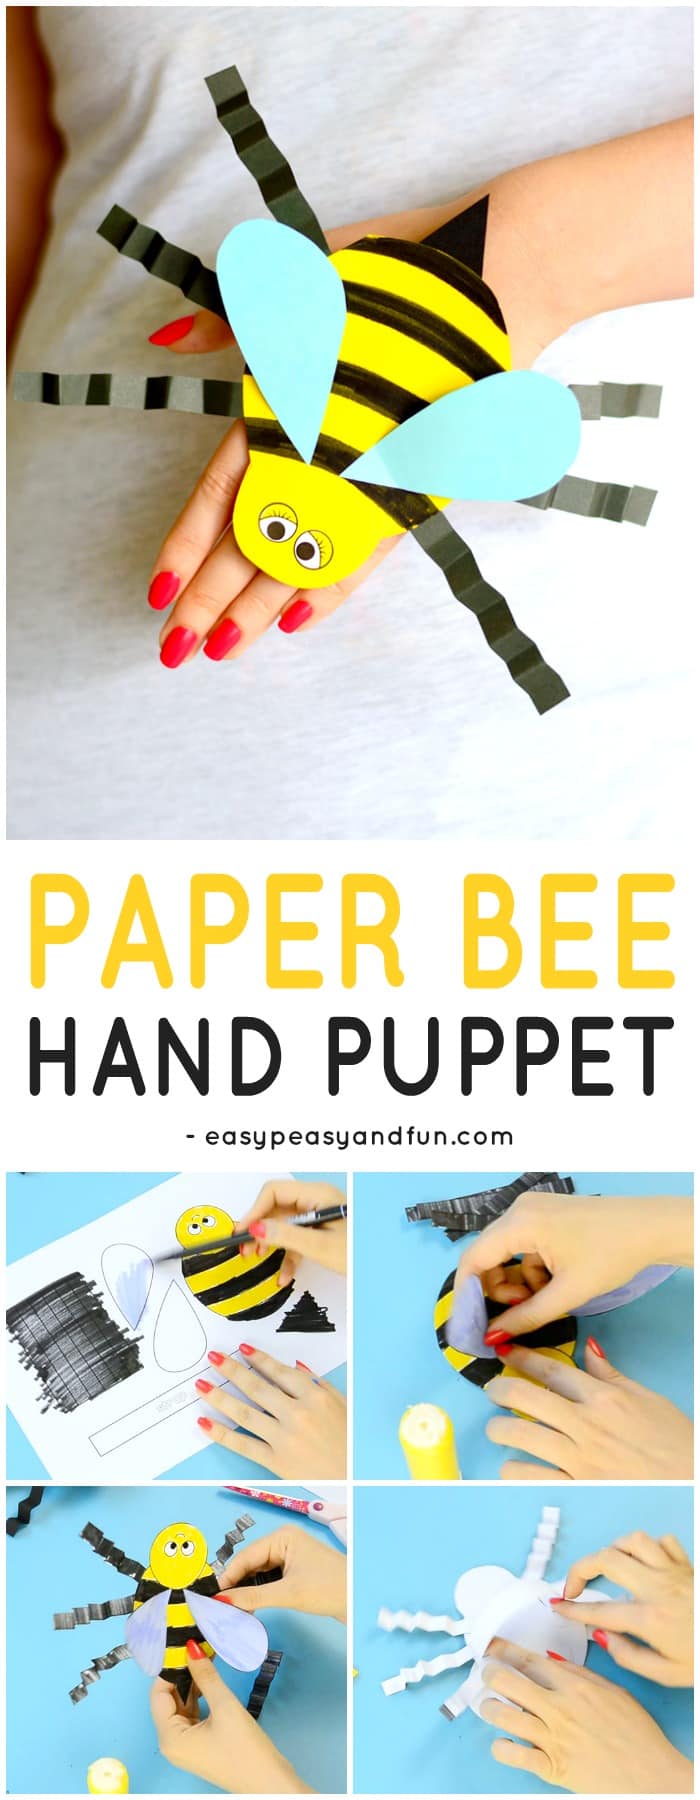 Bee Paper Hand Puppet Template Craft for Kids to Make